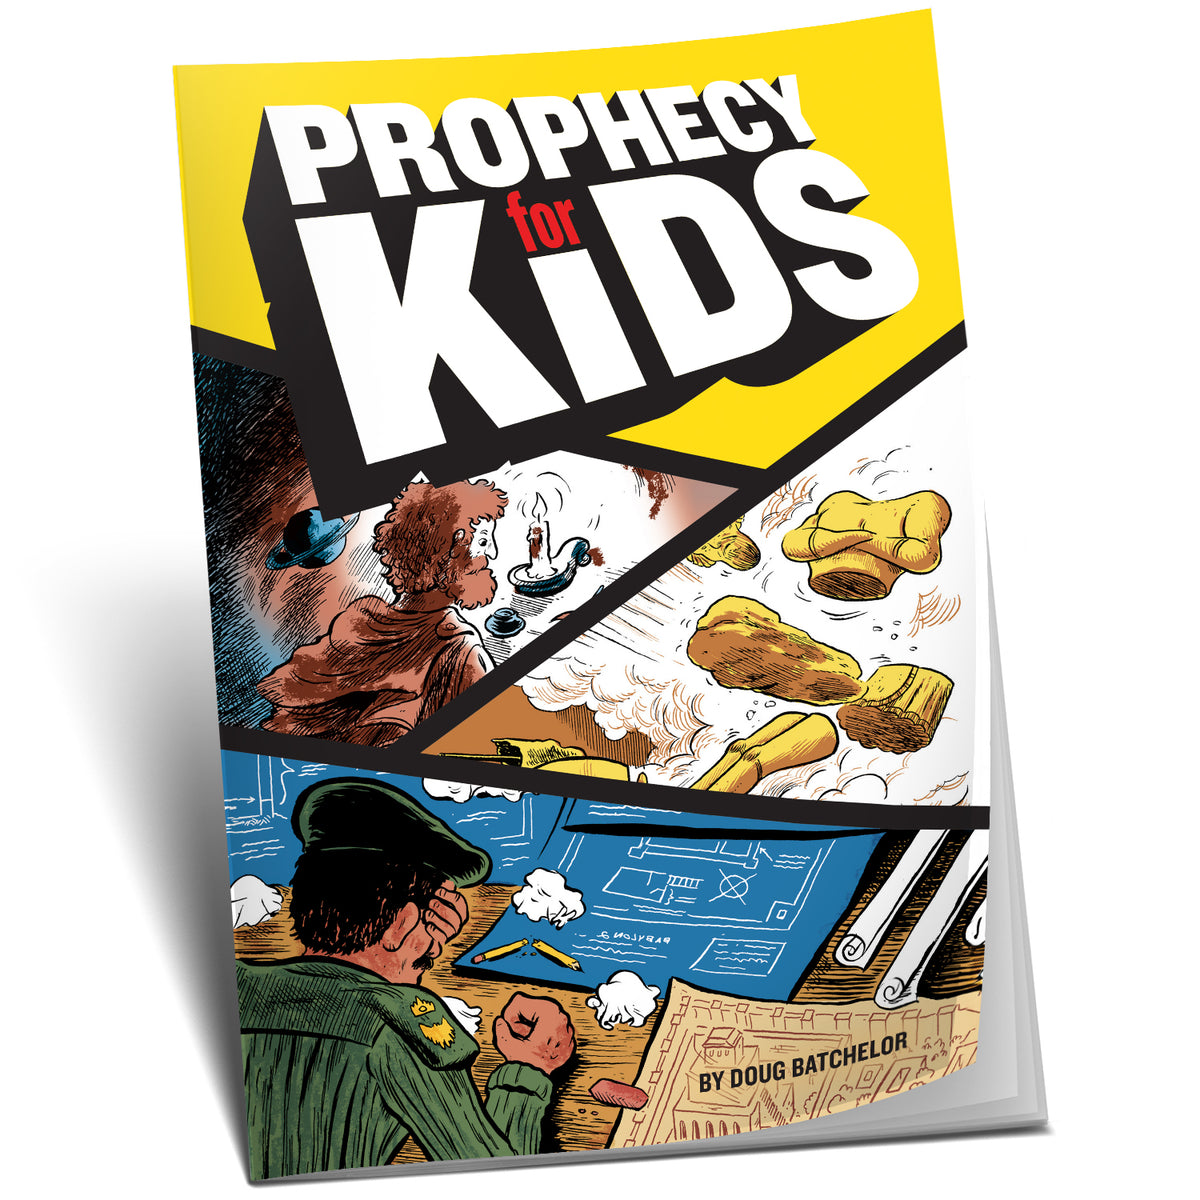 Prophecy for Kids by Doug Batchelor